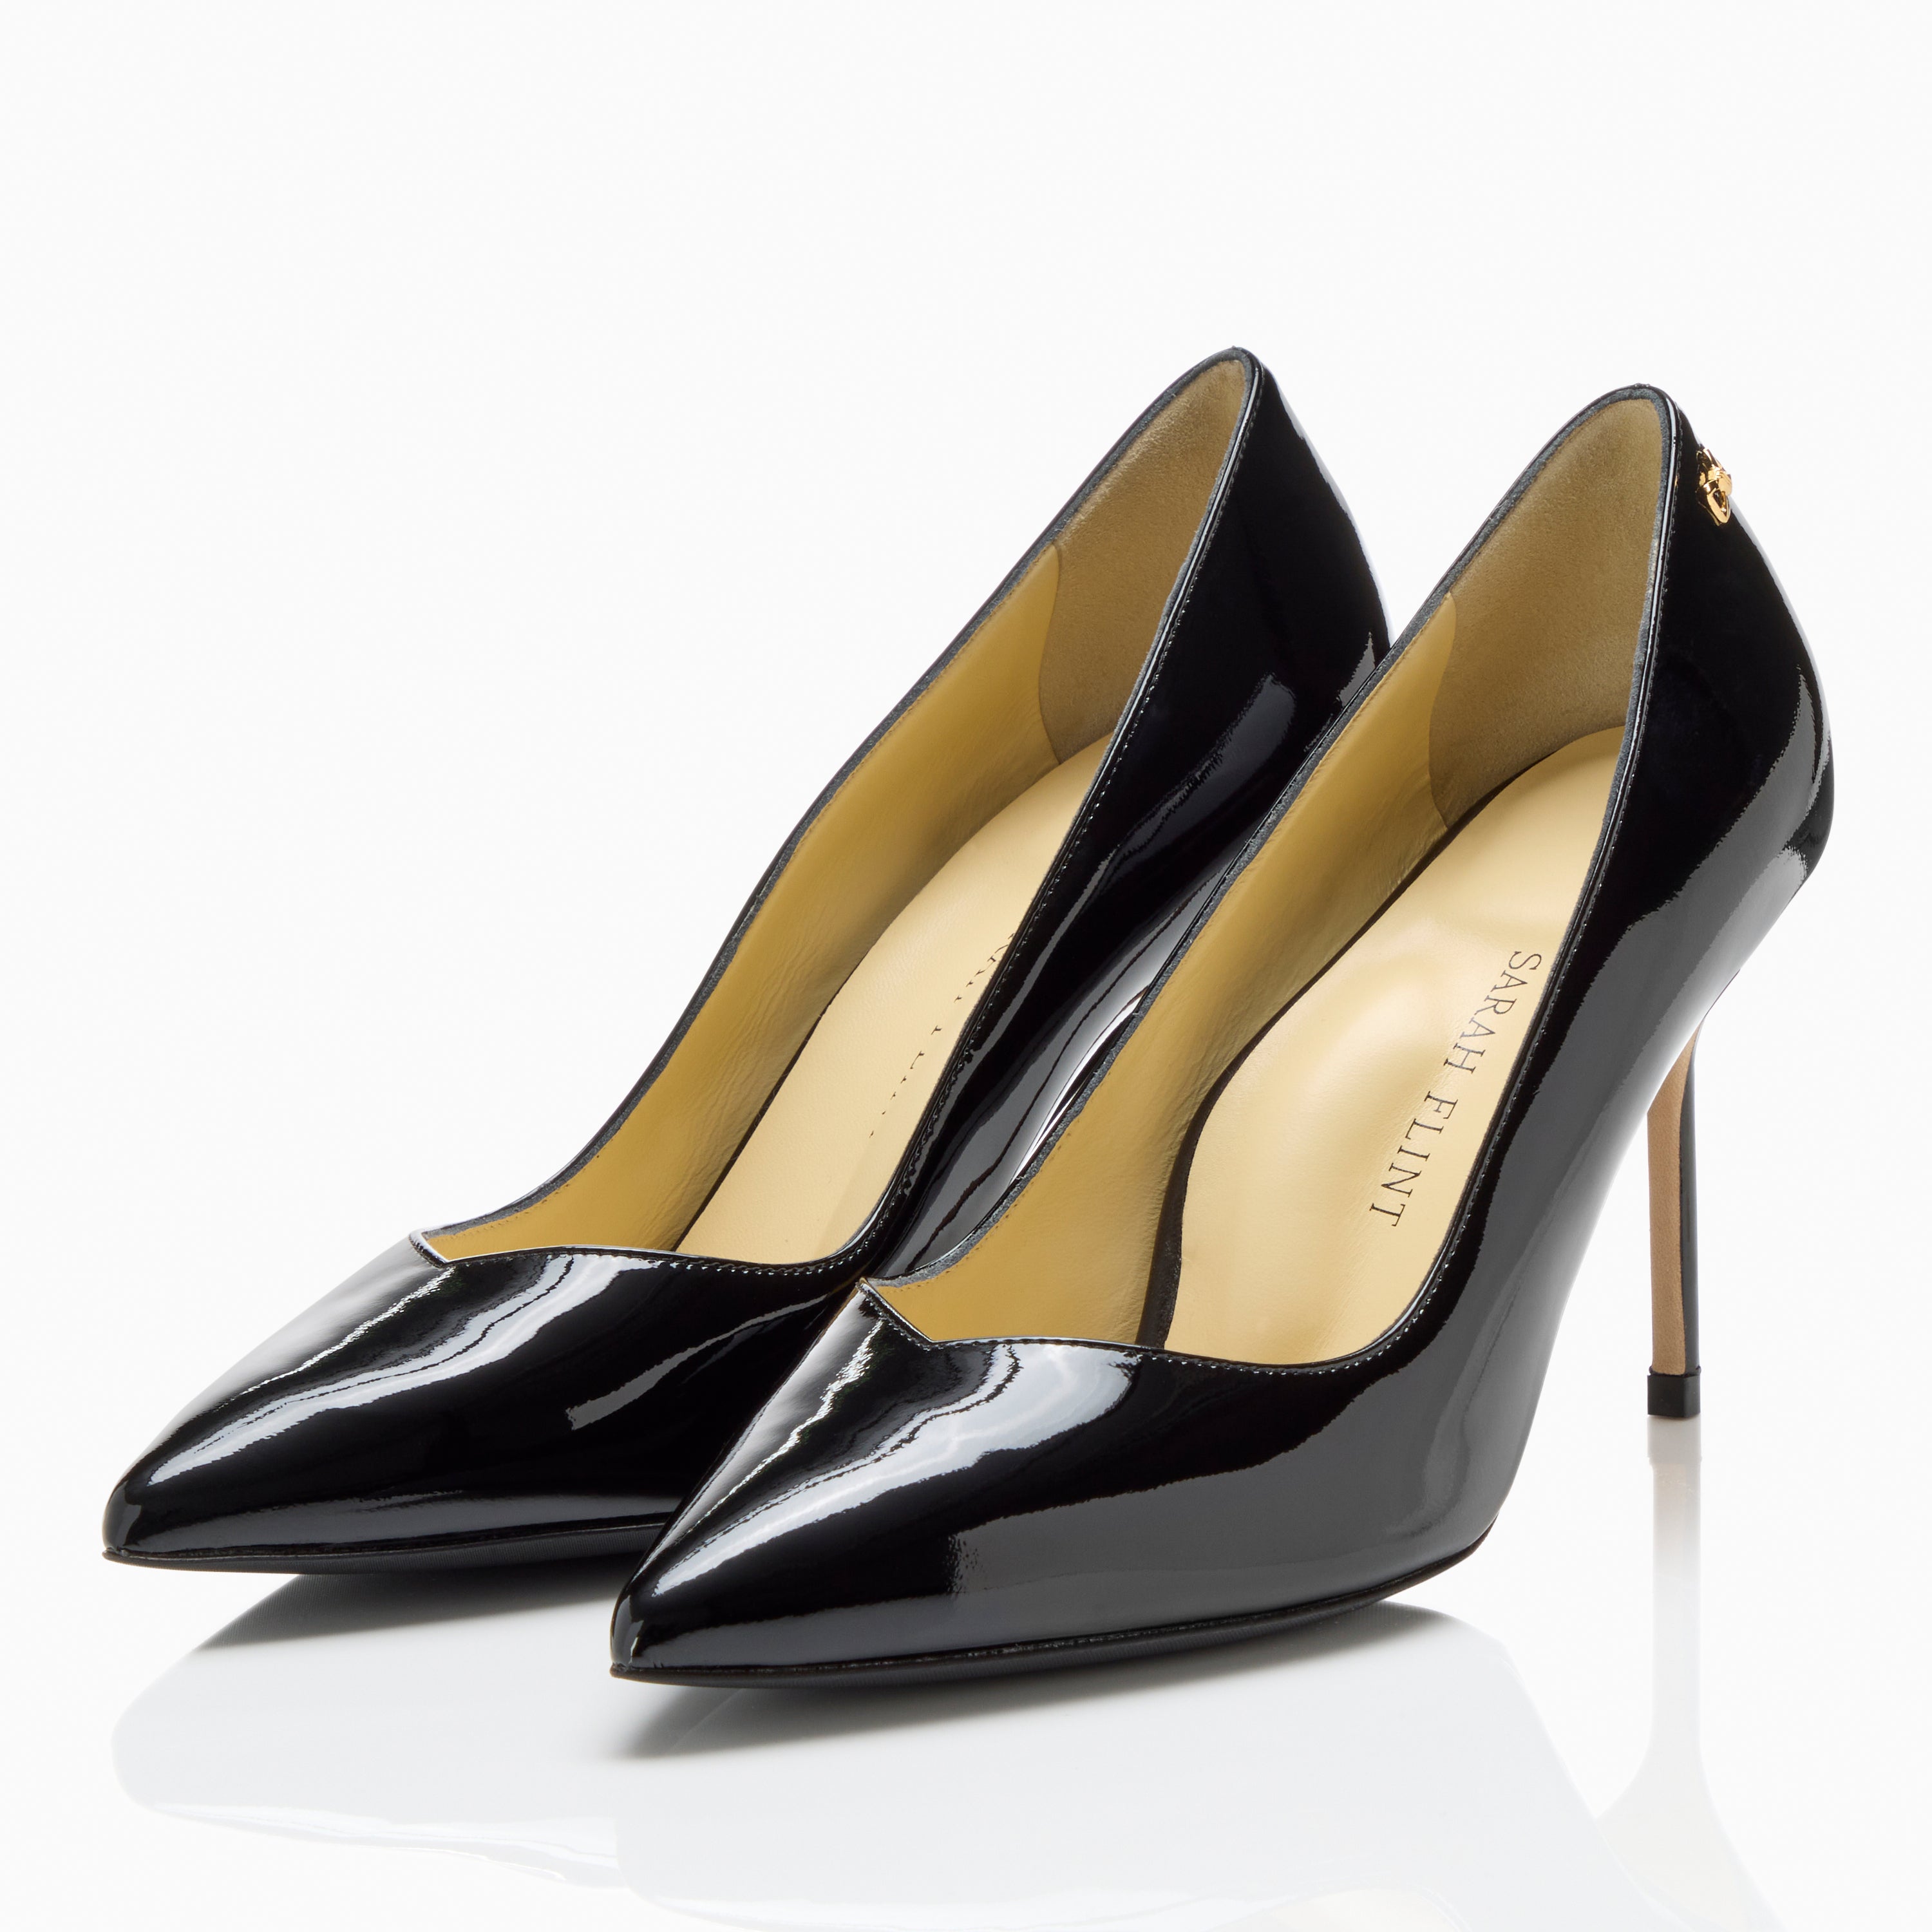 WMNS Ultra-High Patent Leather Shoes - Metal Stiletto Heels / Buckle Ankle  Strap / Black